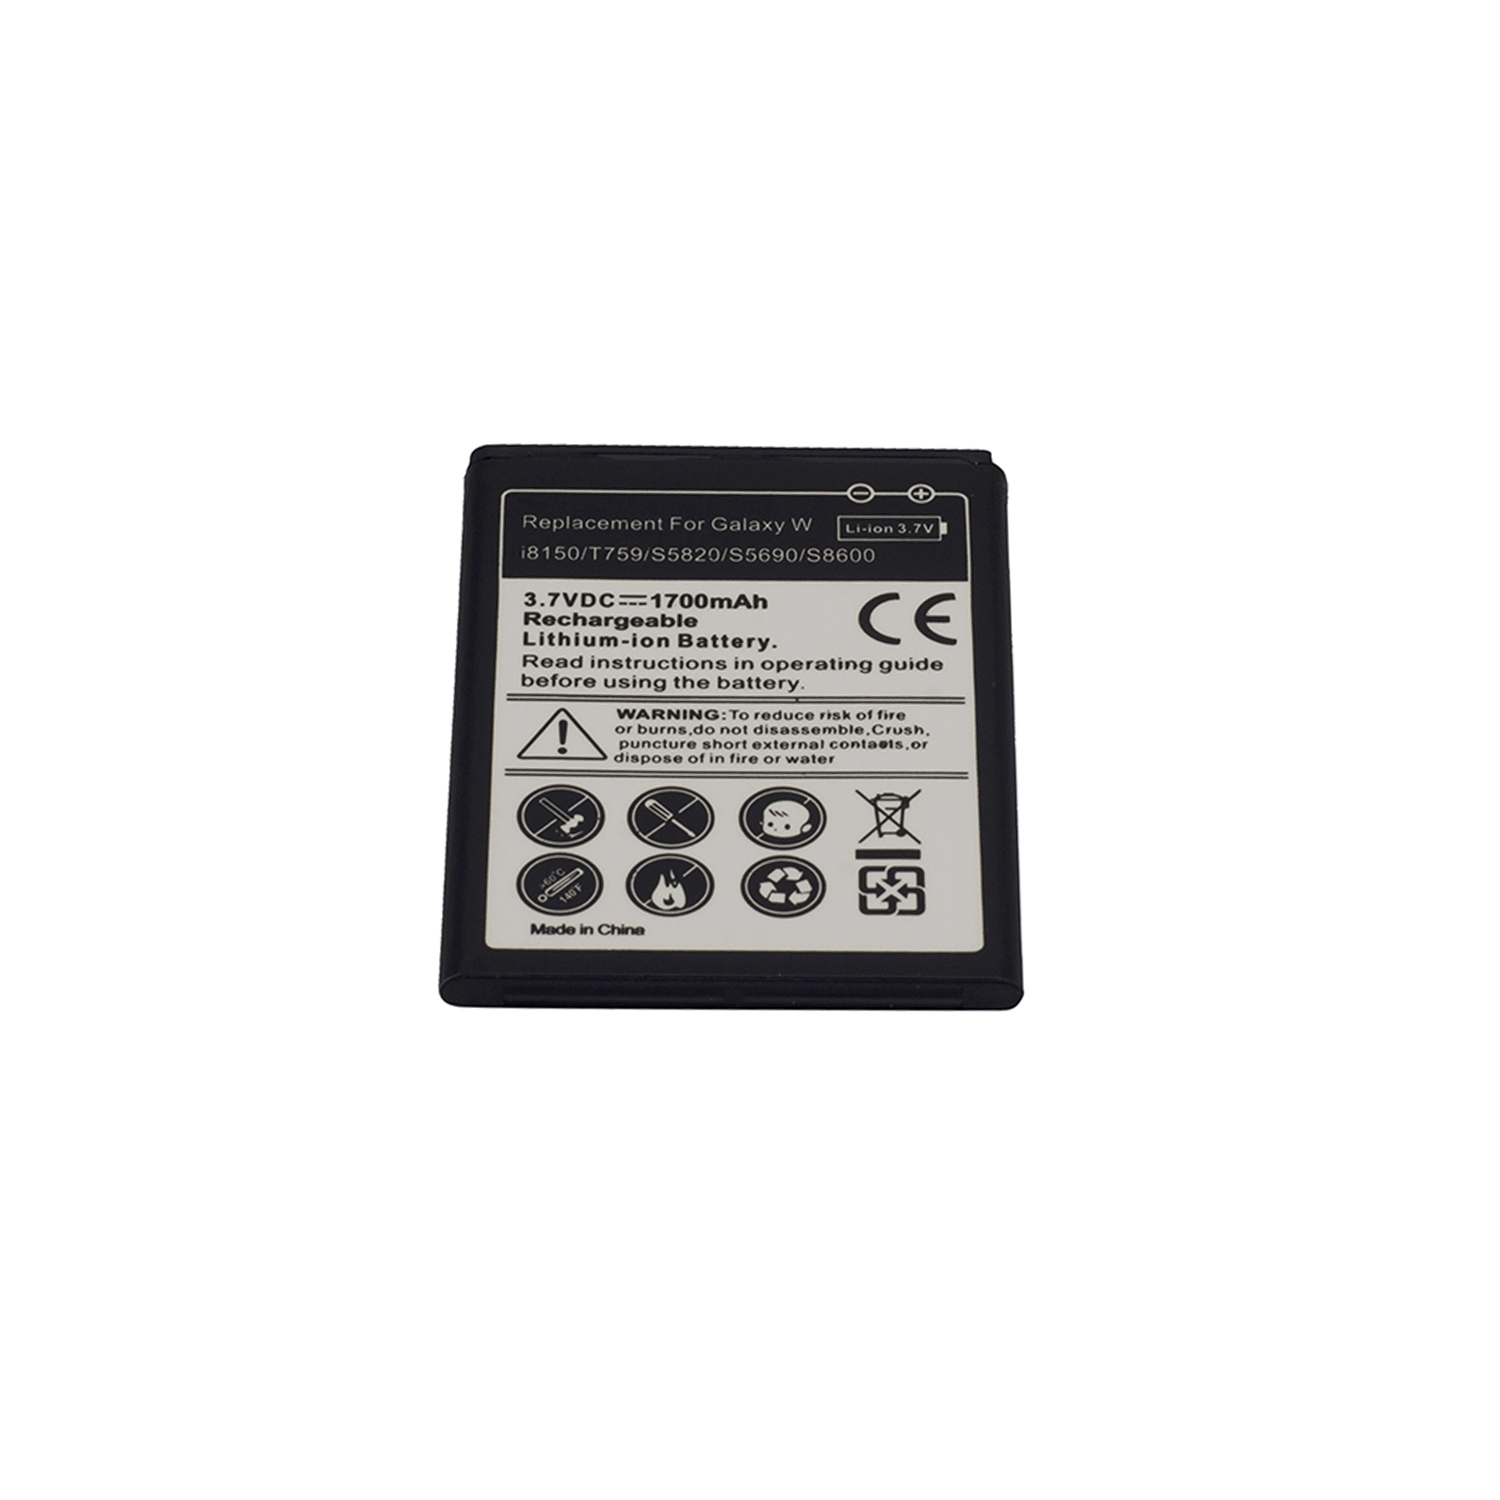 Replacement Battery for the Samsung Galaxy W i8150 S5820 S8600 Wave 3 S5690 W689 - 1500mah